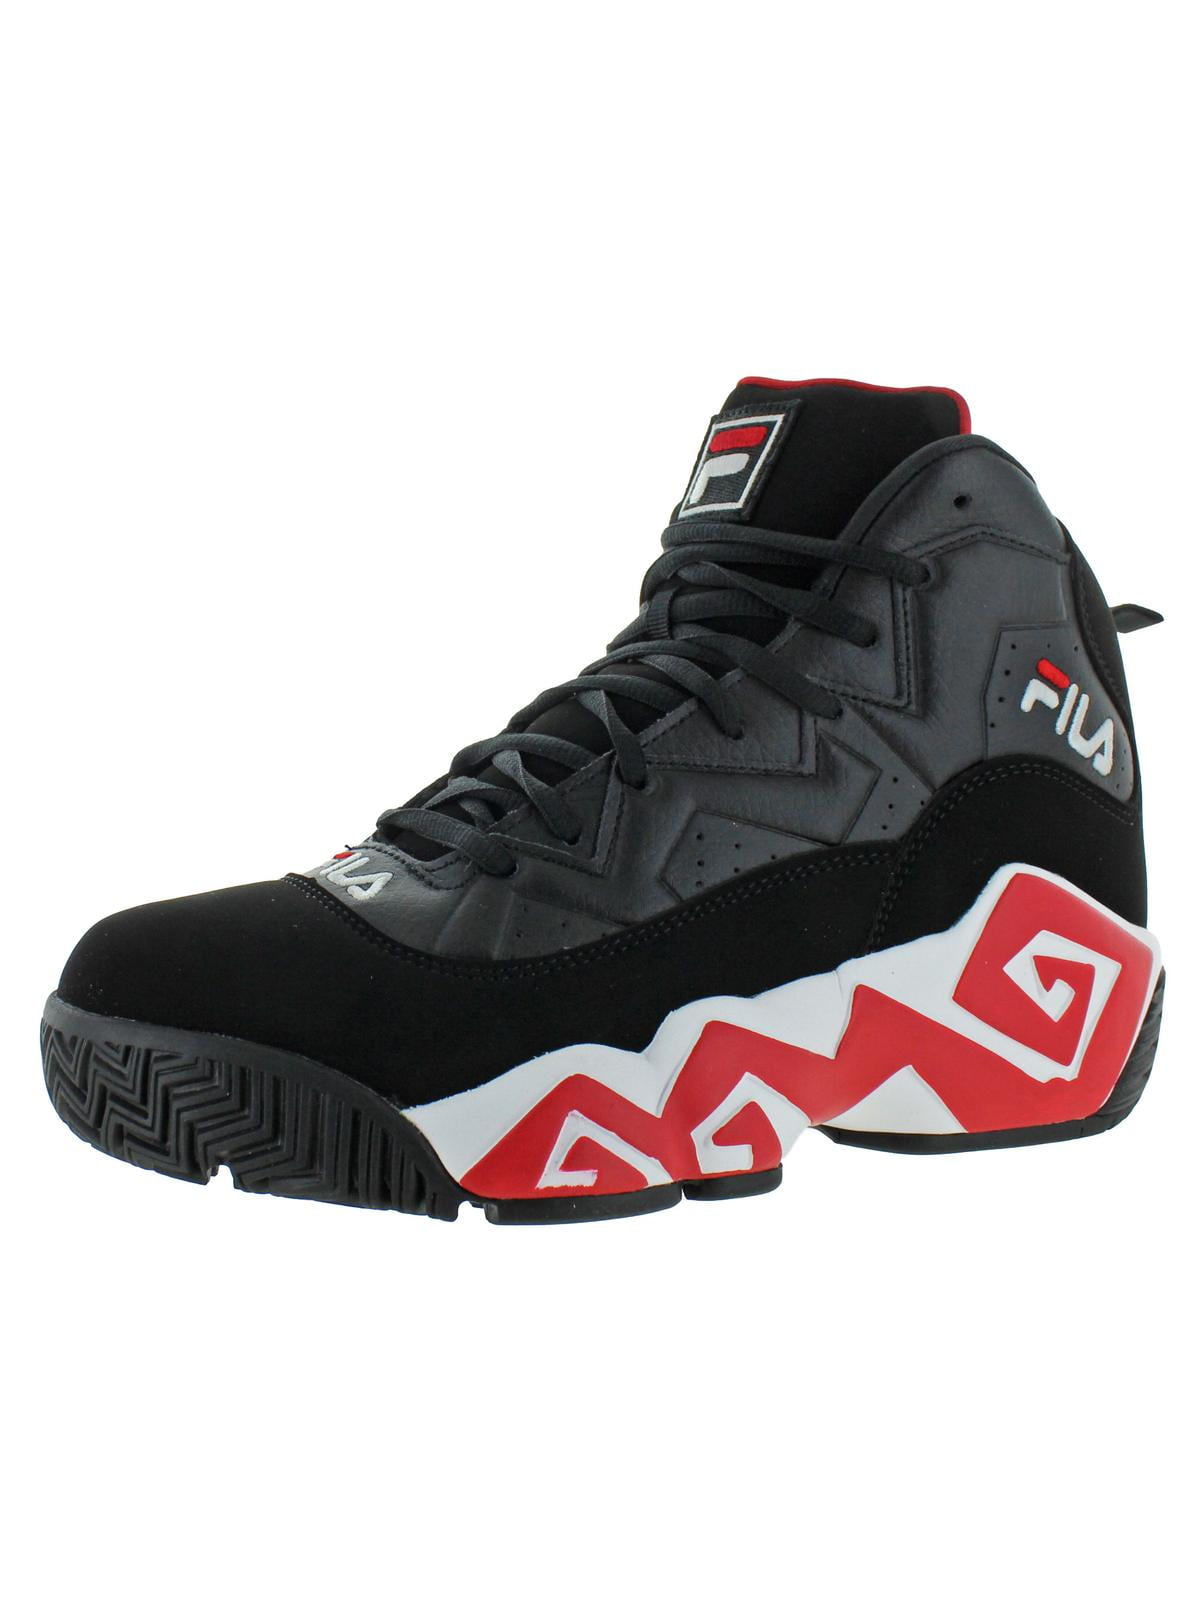 Fila - Fila Men's MB Leather Retro Basketball Trainers Shoes Sneakers ...